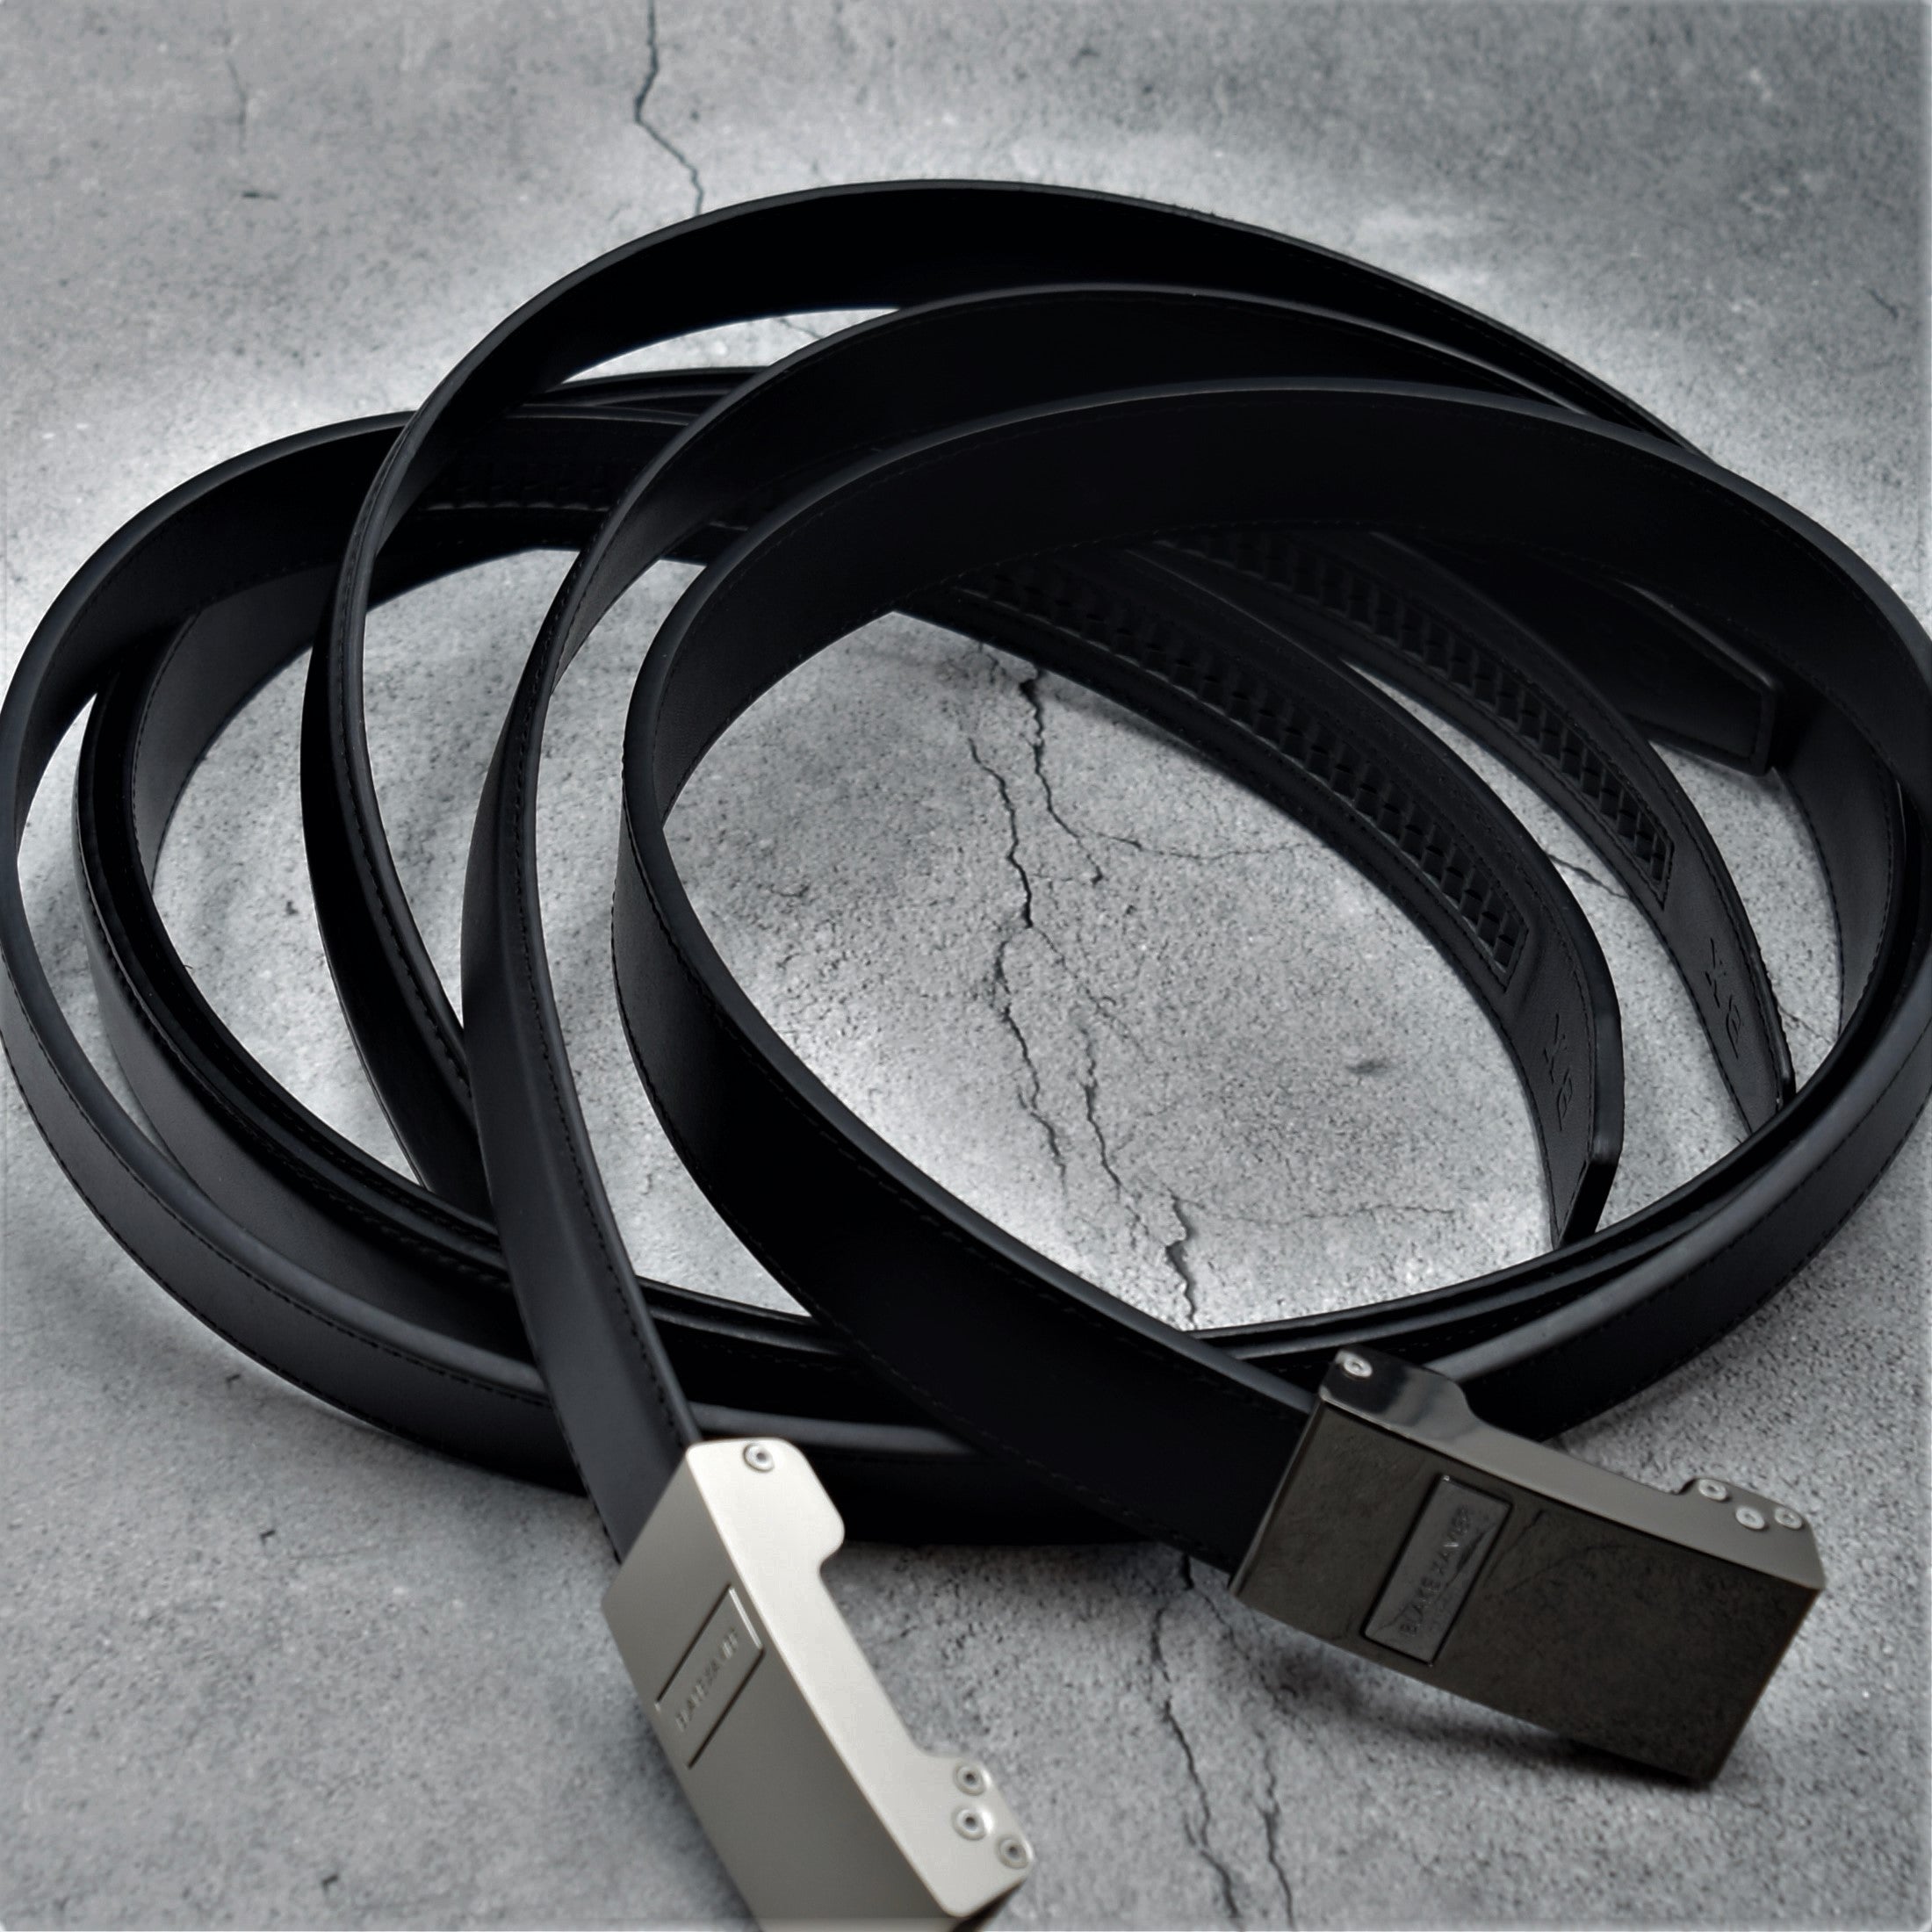 The EXPERT – ULTIMATE Belt Belts] [Black The Collection